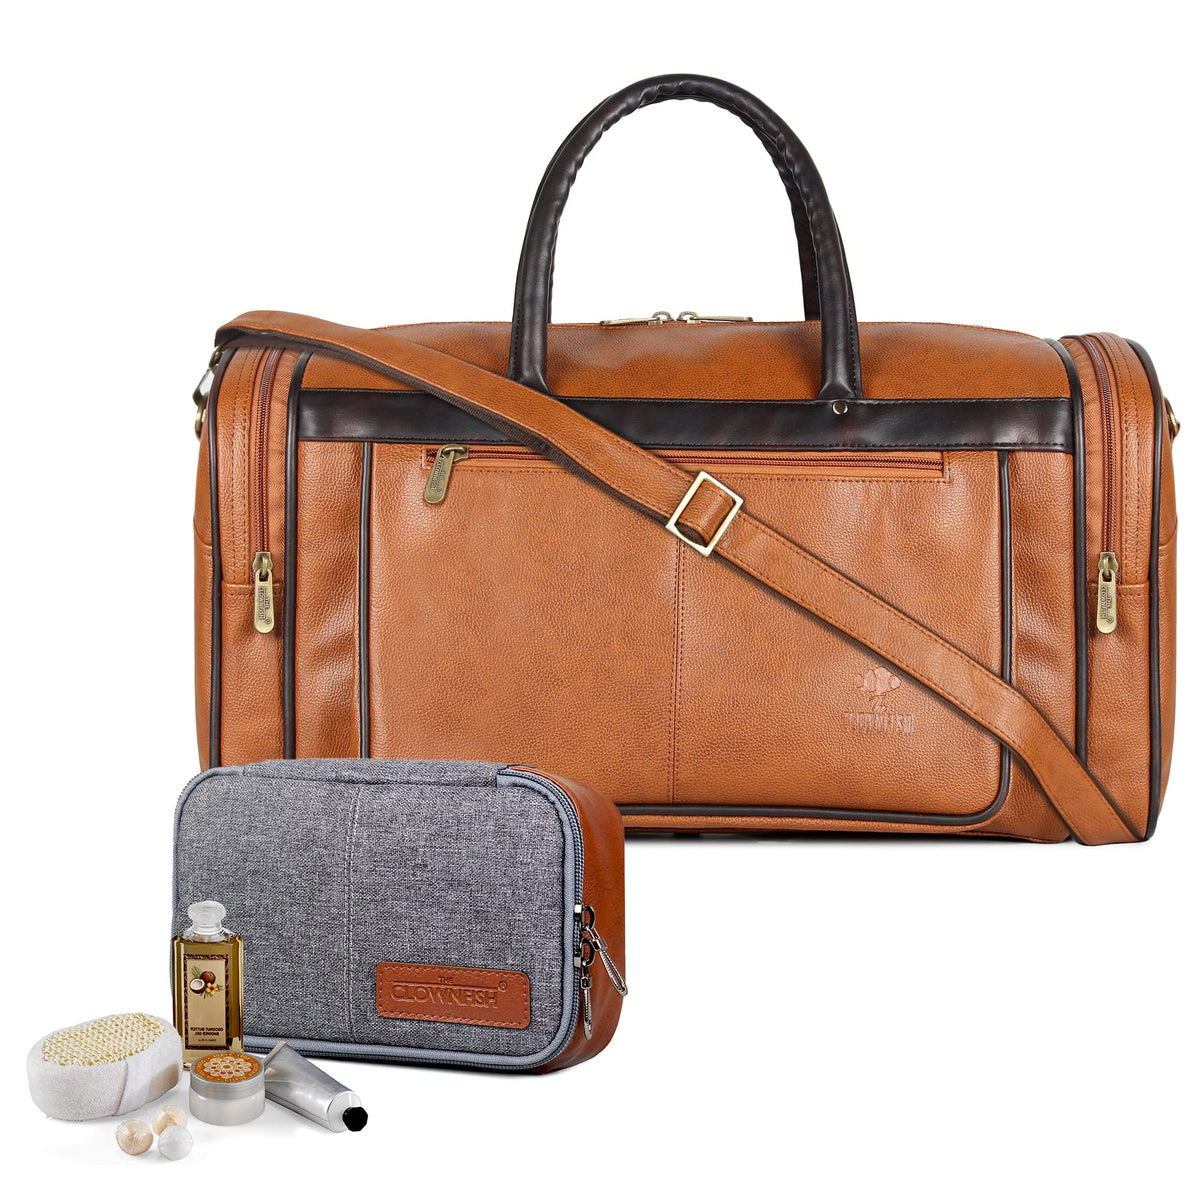 The Clownfish Combo of Milo 38 litres Faux Leather Travel Duffle Bag (Tan) & The Clownfish Travel Pouch Toiletry Bag (Grey)